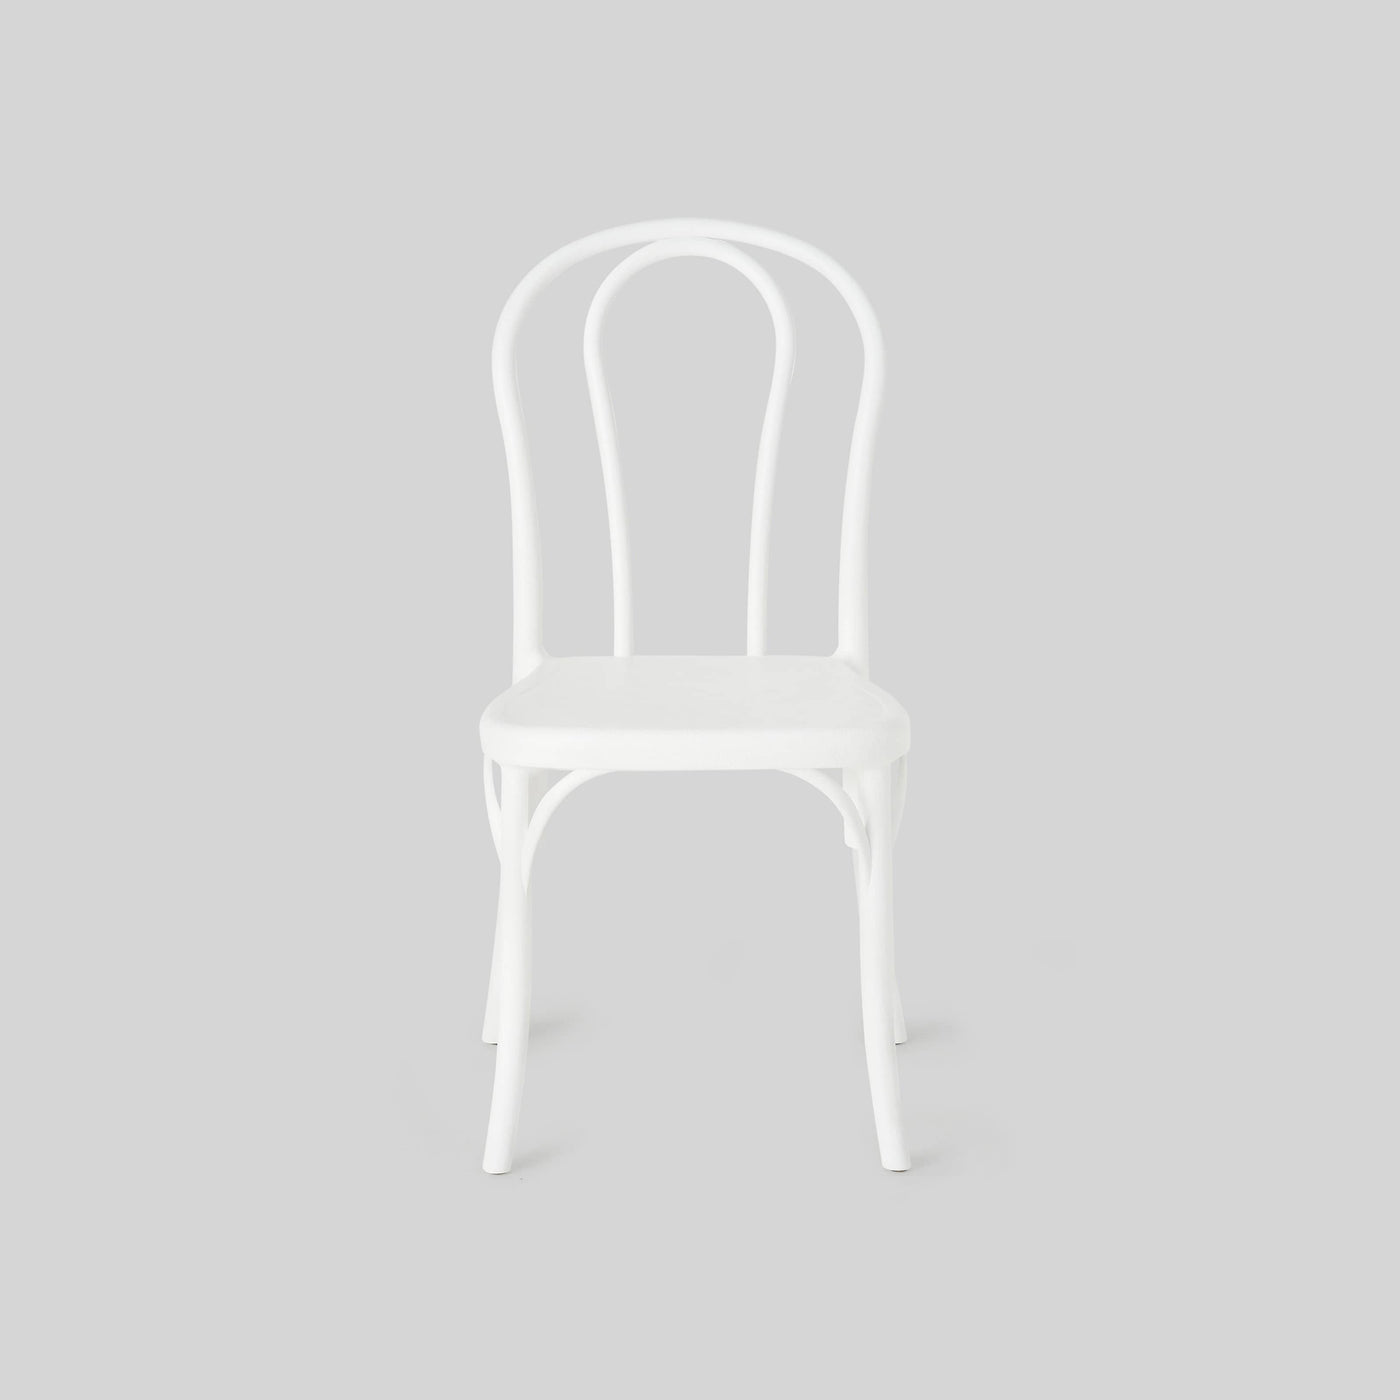 Rapha Set of 4 Dining Chairs, White - 1